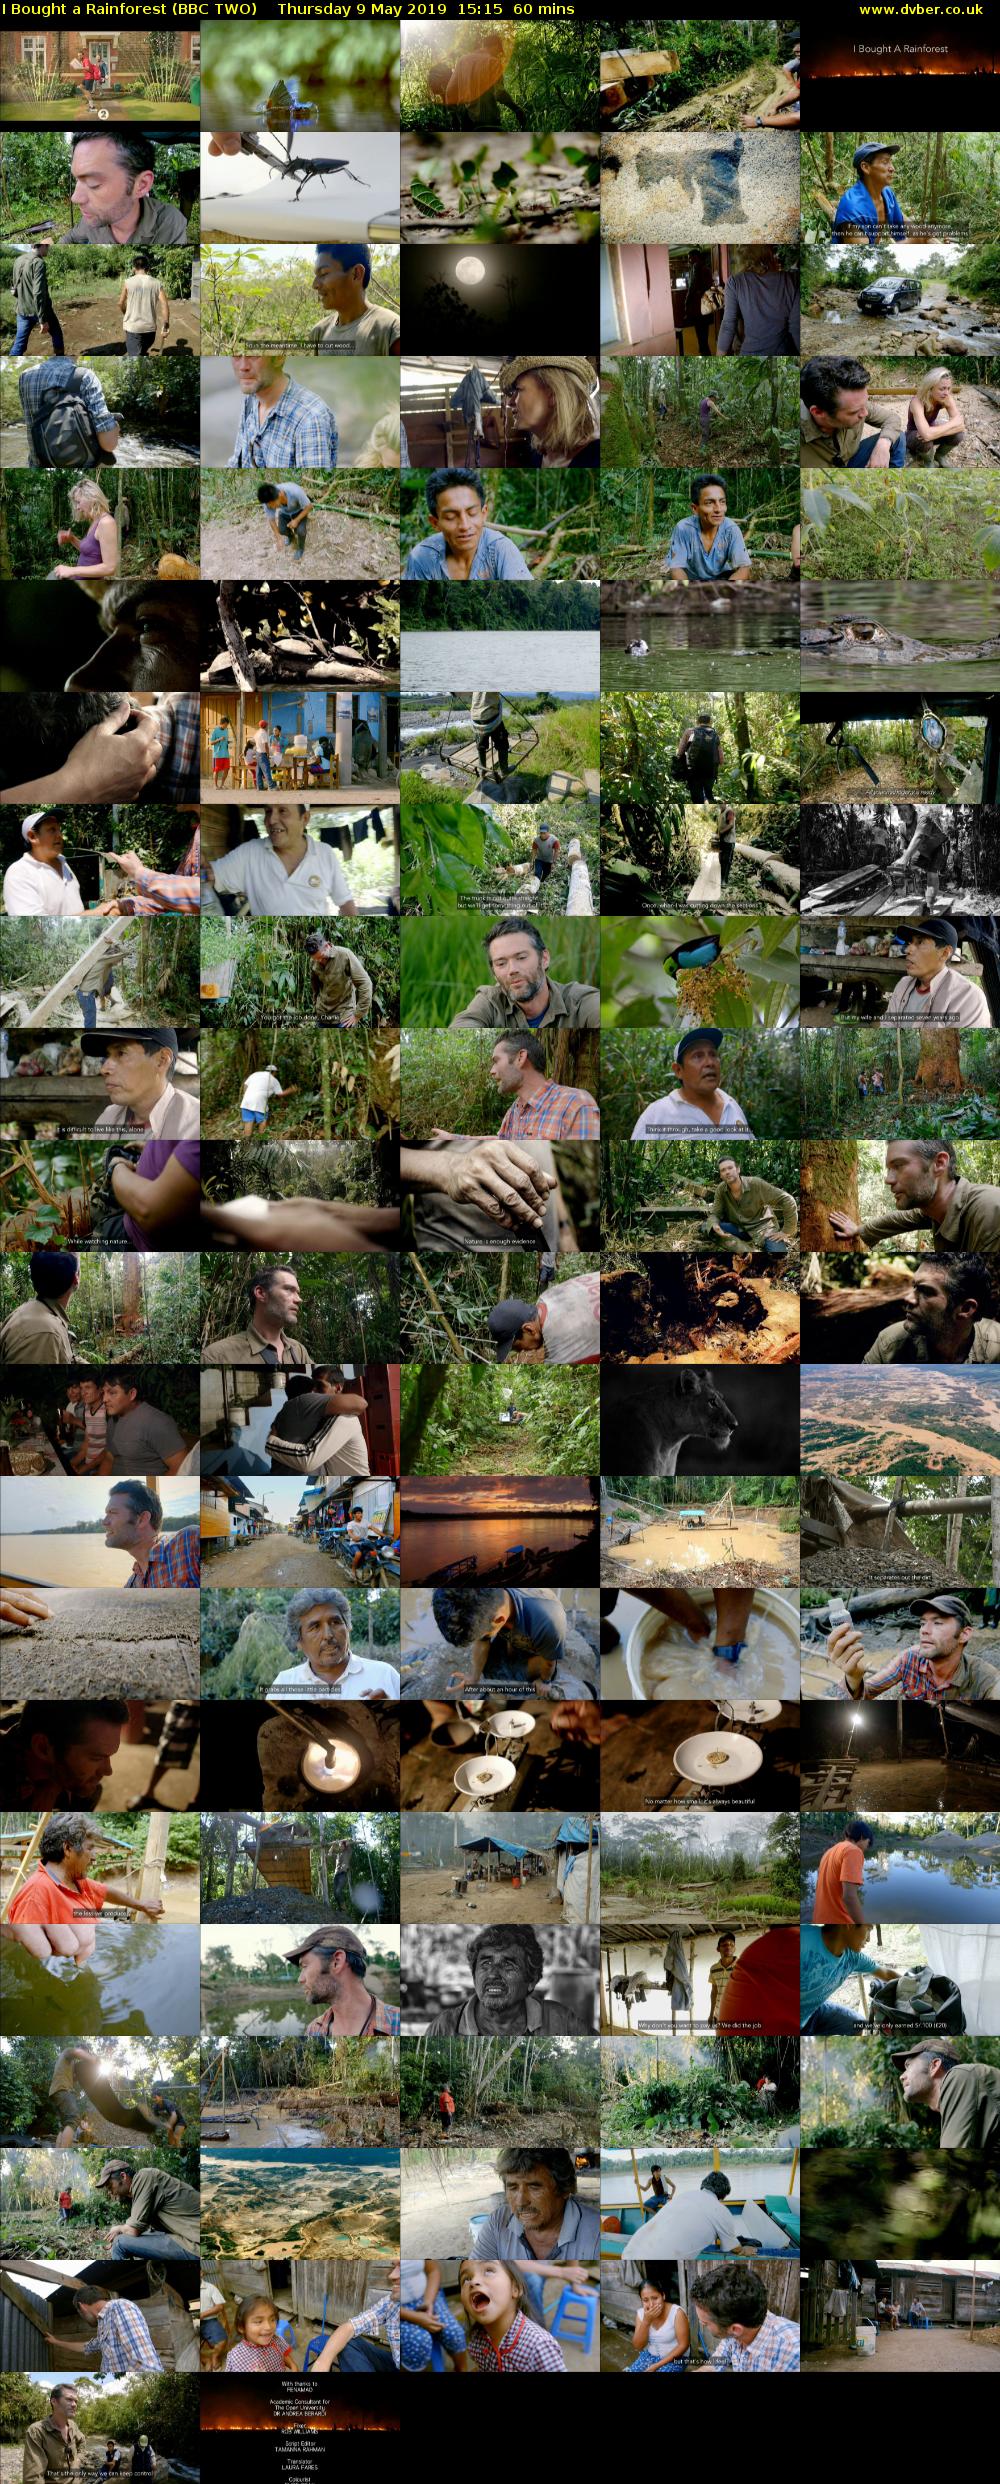 I Bought a Rainforest (BBC TWO) Thursday 9 May 2019 15:15 - 16:15